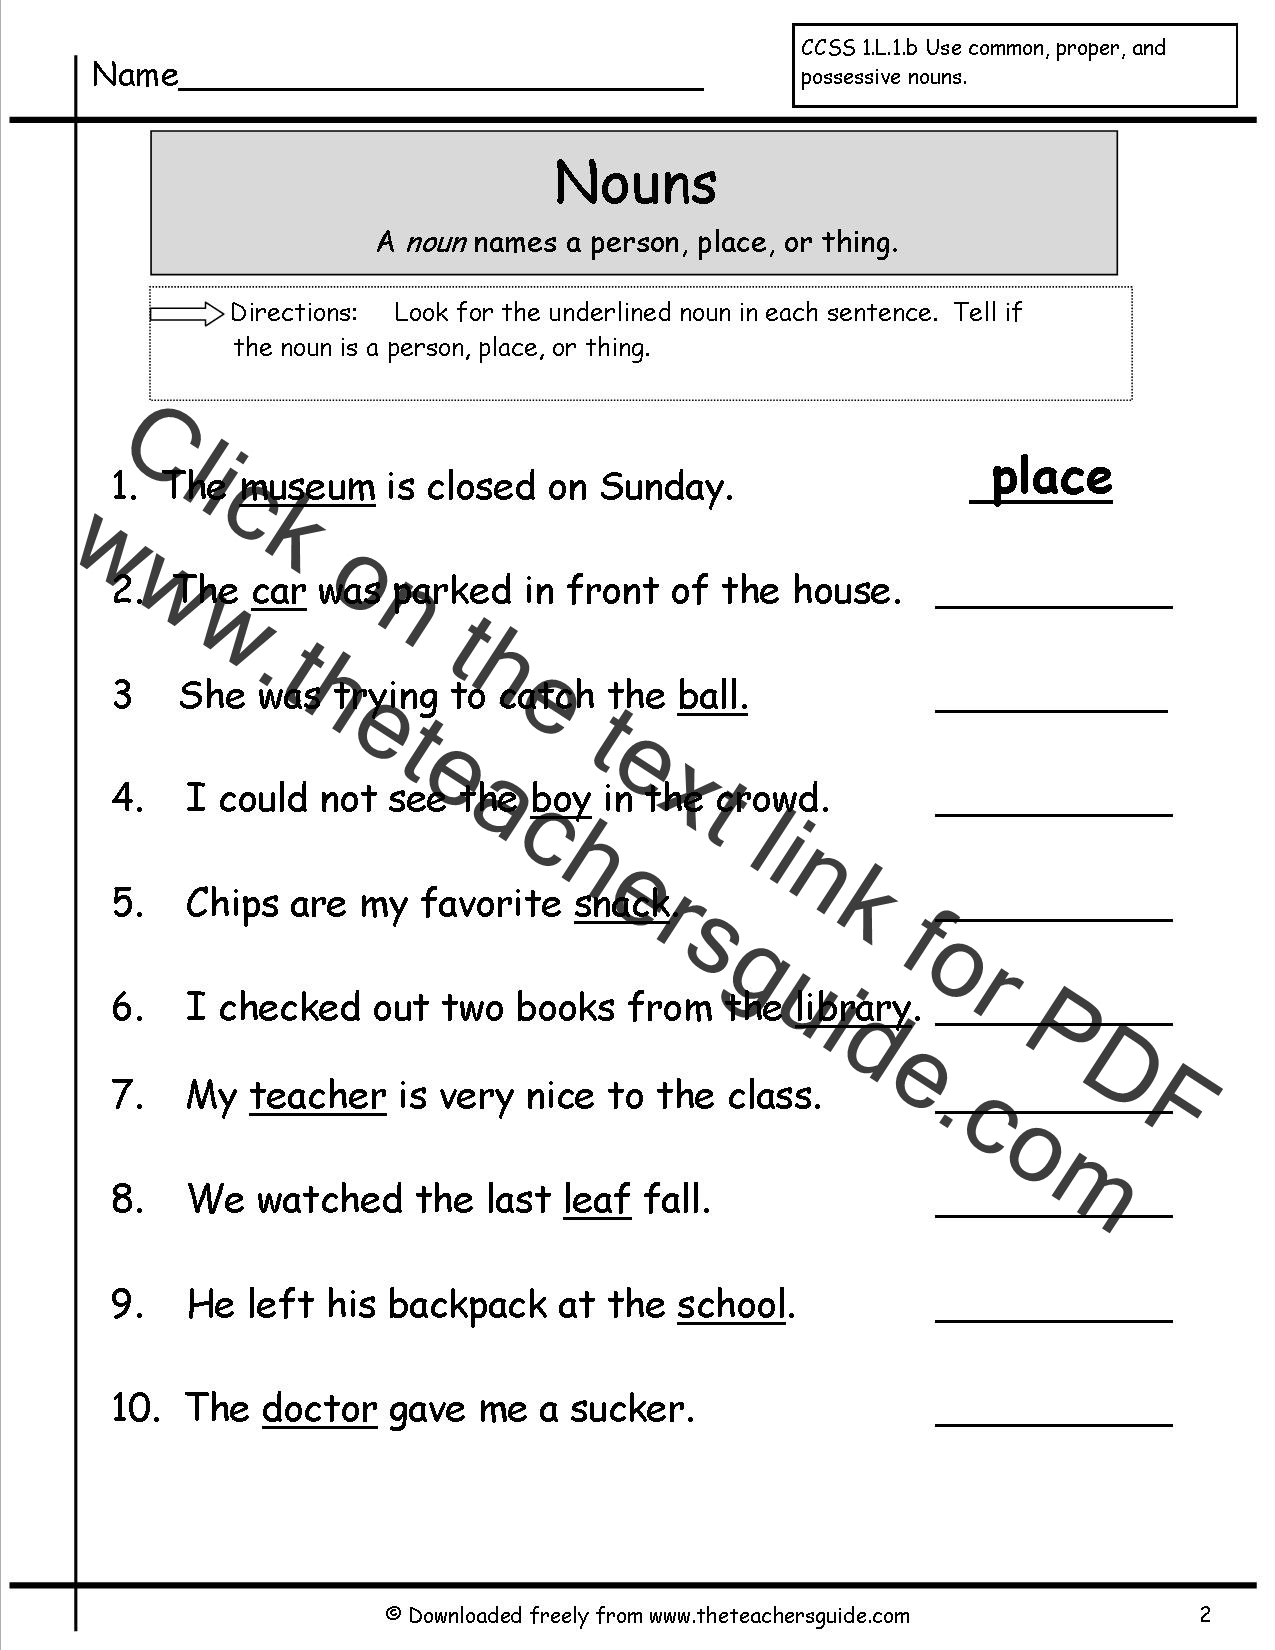 Nouns Worksheets from The Teacher #39 s Guide